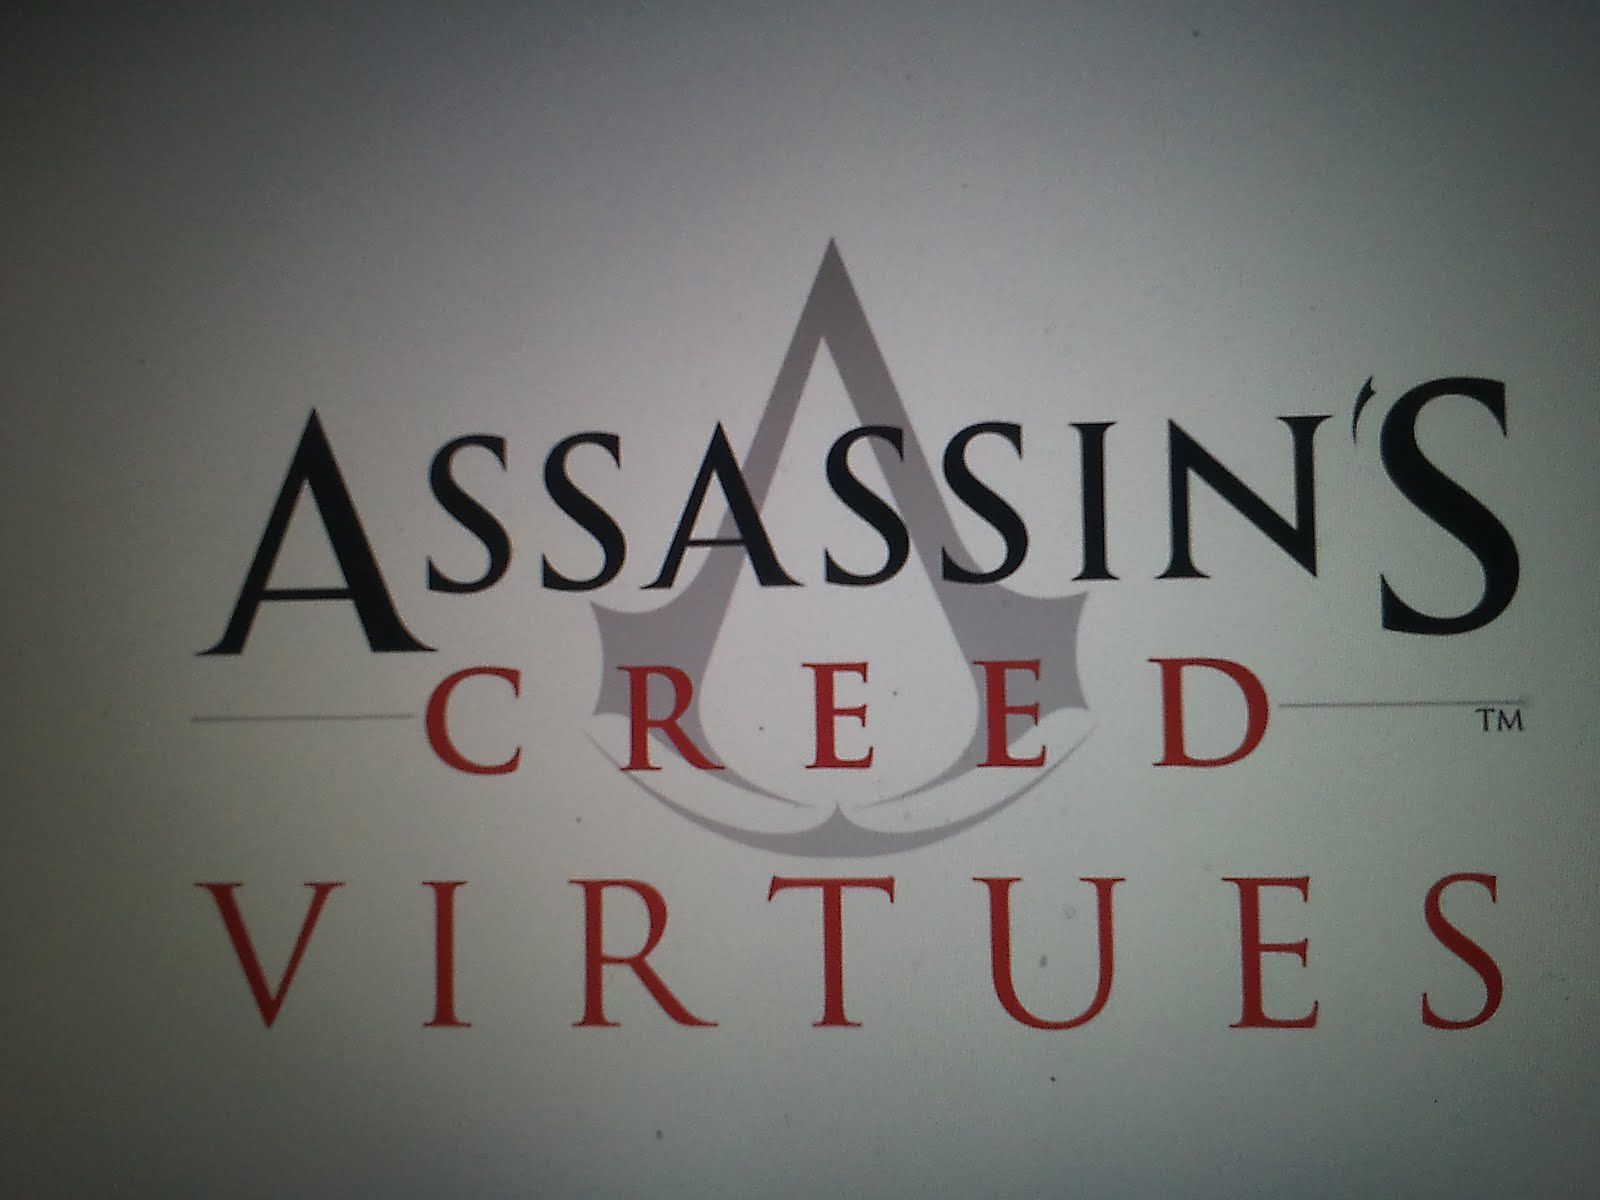 Assassin's Creed Vertues